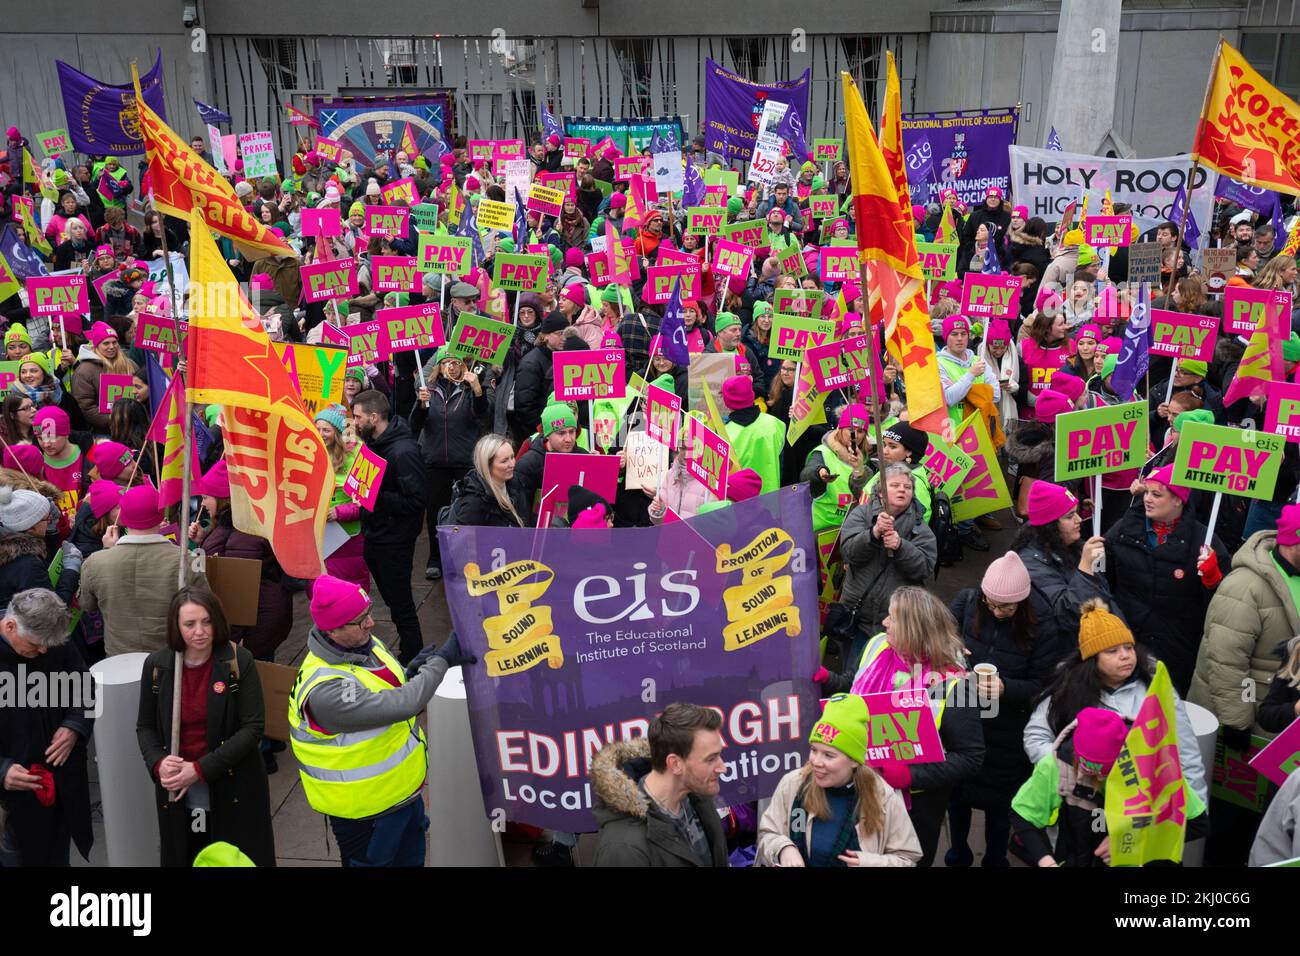 Edinburgh, Scotland, UK. 24th November 2022. Striking teachers from the EIS attend a rally at the Scottish Parliament at Holyrood, Edinburgh today. All schools in Scotland are closed today due to strike action by the EIS union caused by their ongoing dispute over a  pay offer which has been rejected. Iain Masterton/Alamy Live News Stock Photo